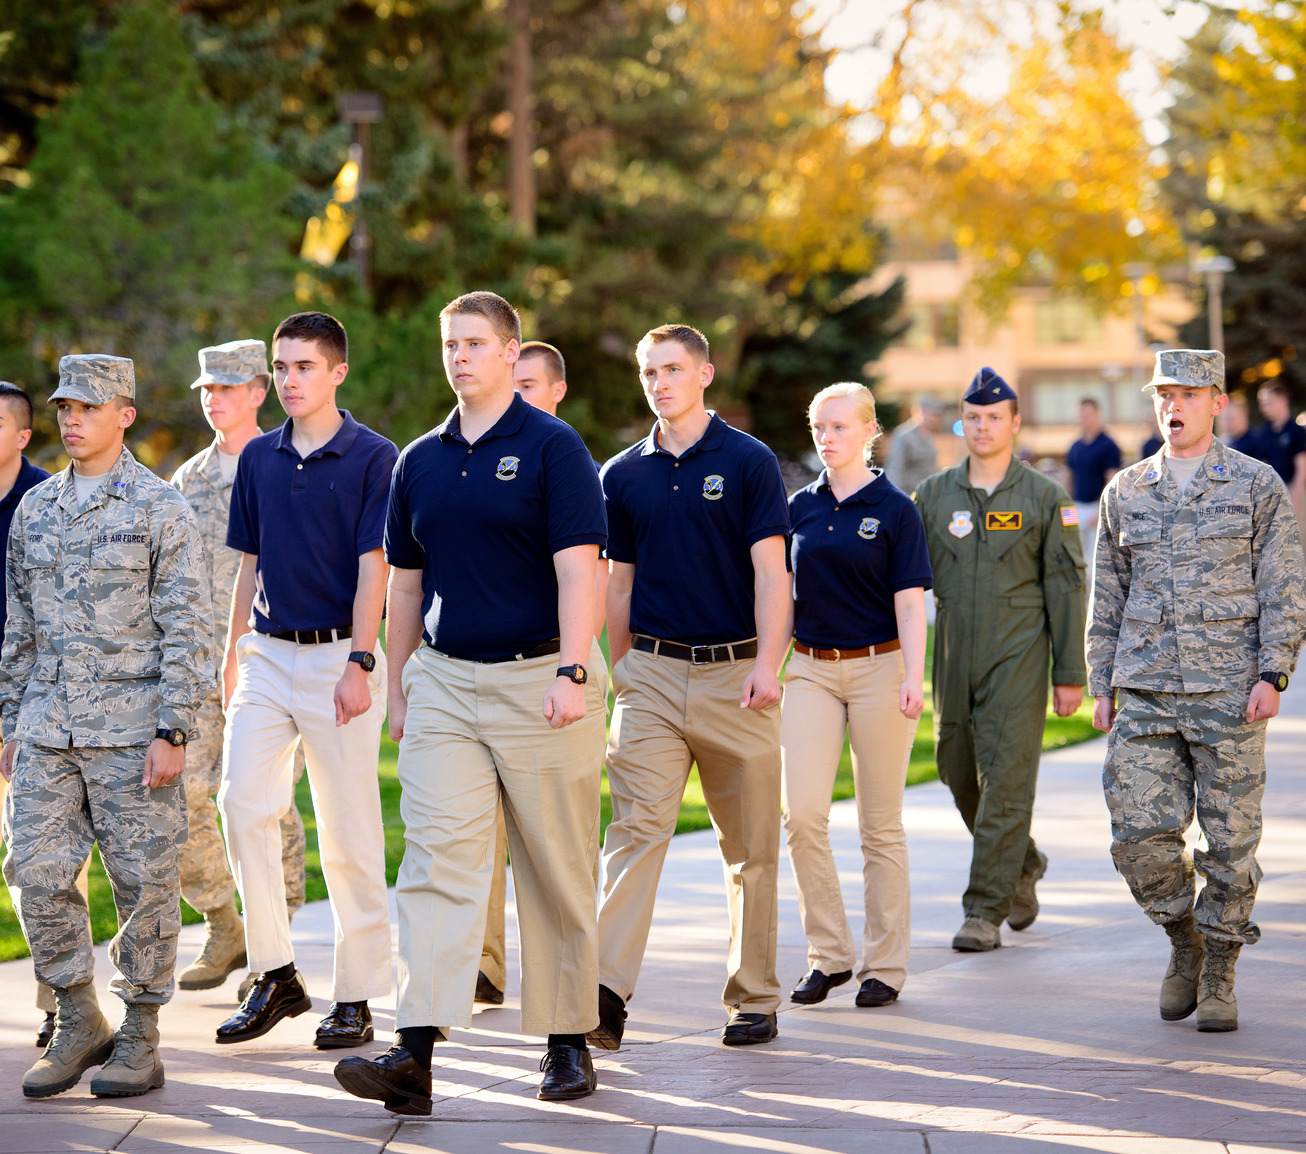 ROTC students march on the UW campus.